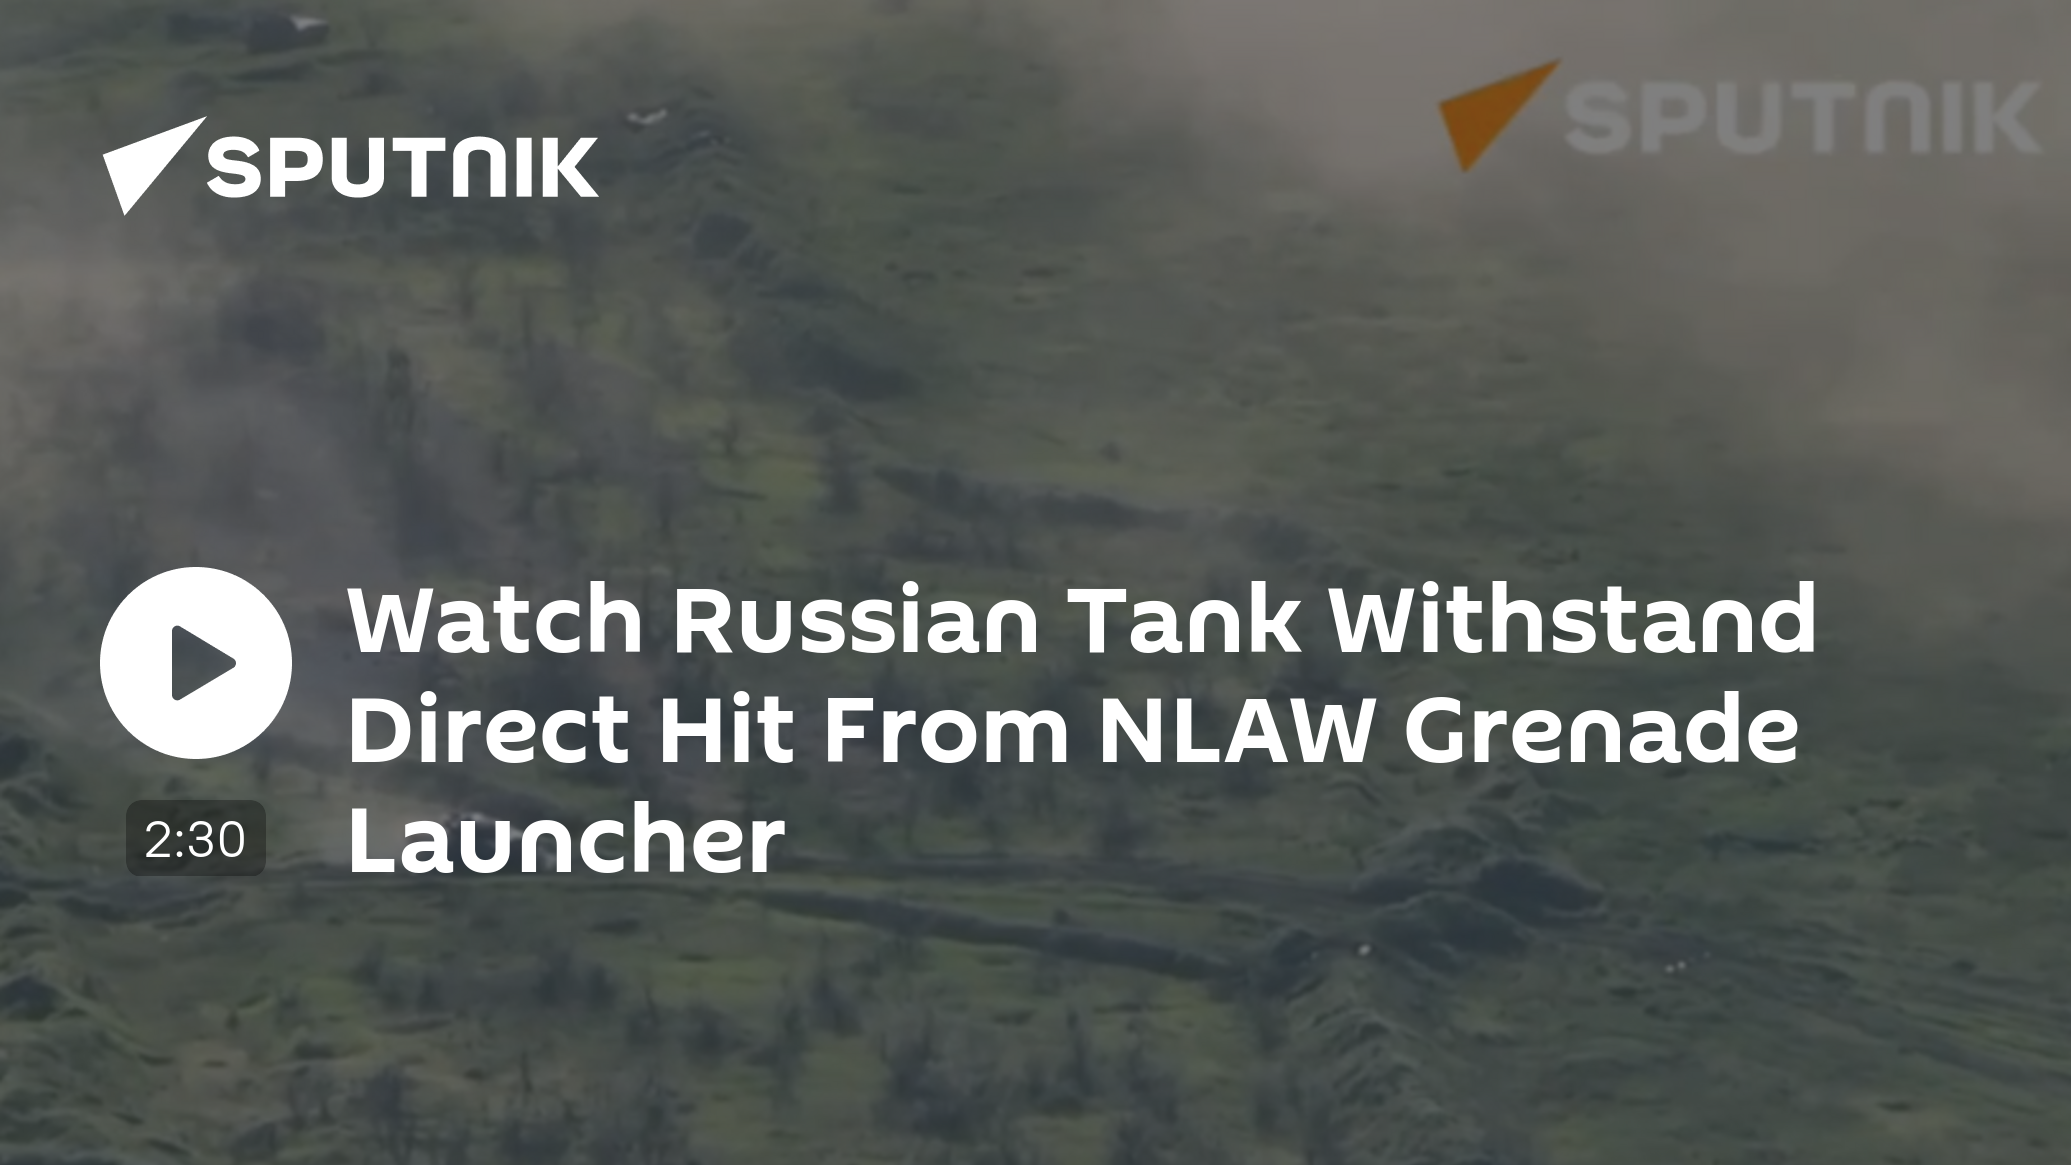 Watch Russian Tank Withstand Direct Hit From NLAW Grenade Launcher